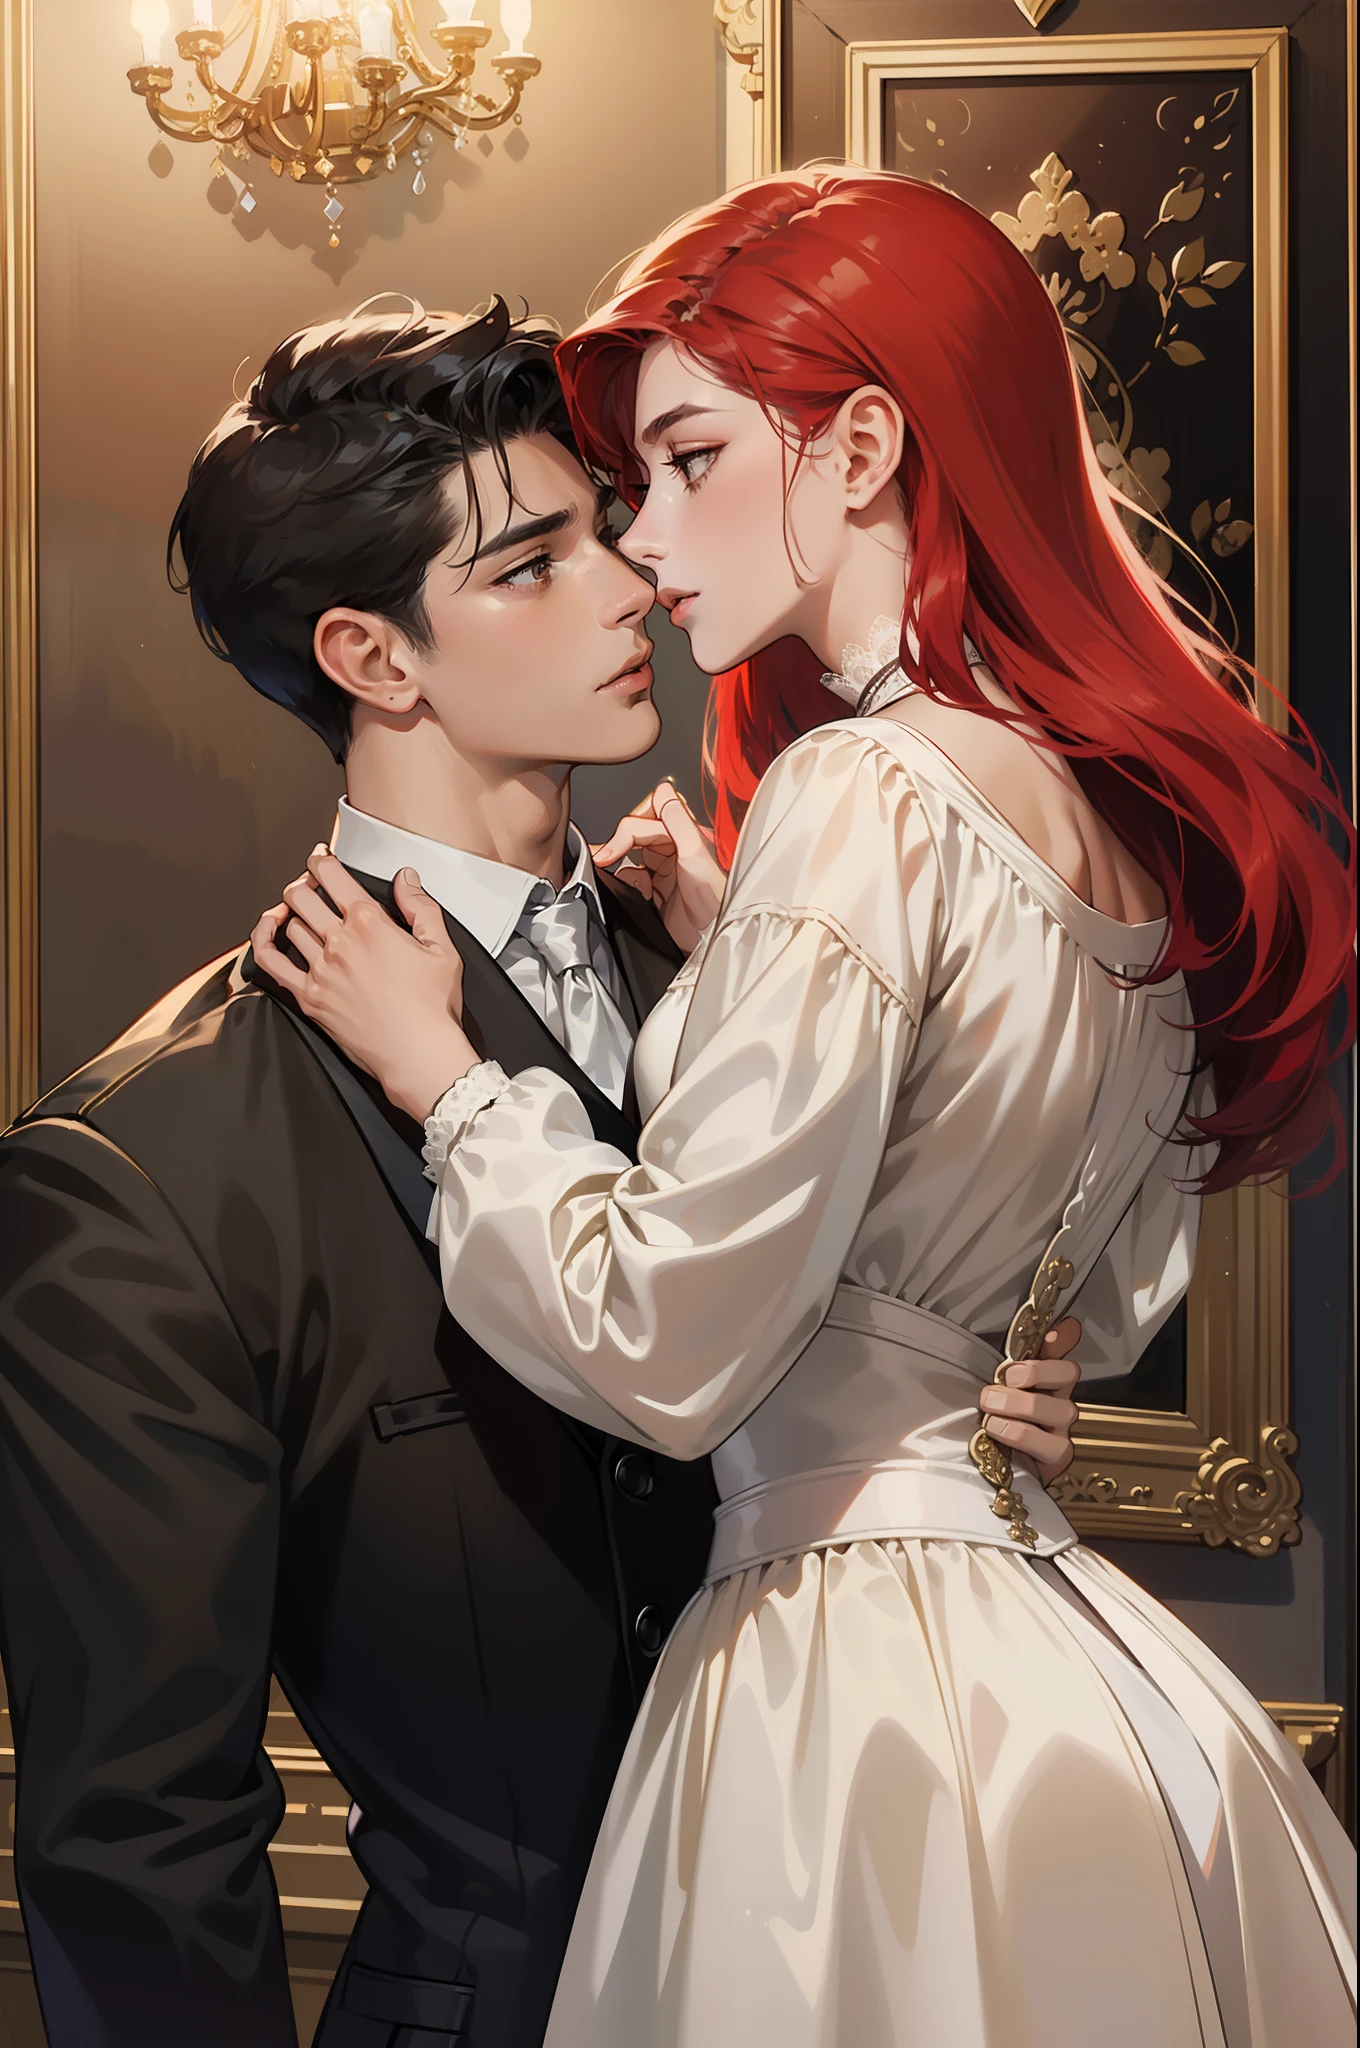 ((Masterpieces)), Best Quality, outstanding illustration, a couple kissing, soft focus, 1 boy with short black hair, 1 girl from (((Red hair))) long curly, victorian clothing, victorian romanticism, opulent and exquisite atmosphere, Soft light and warm lighting.